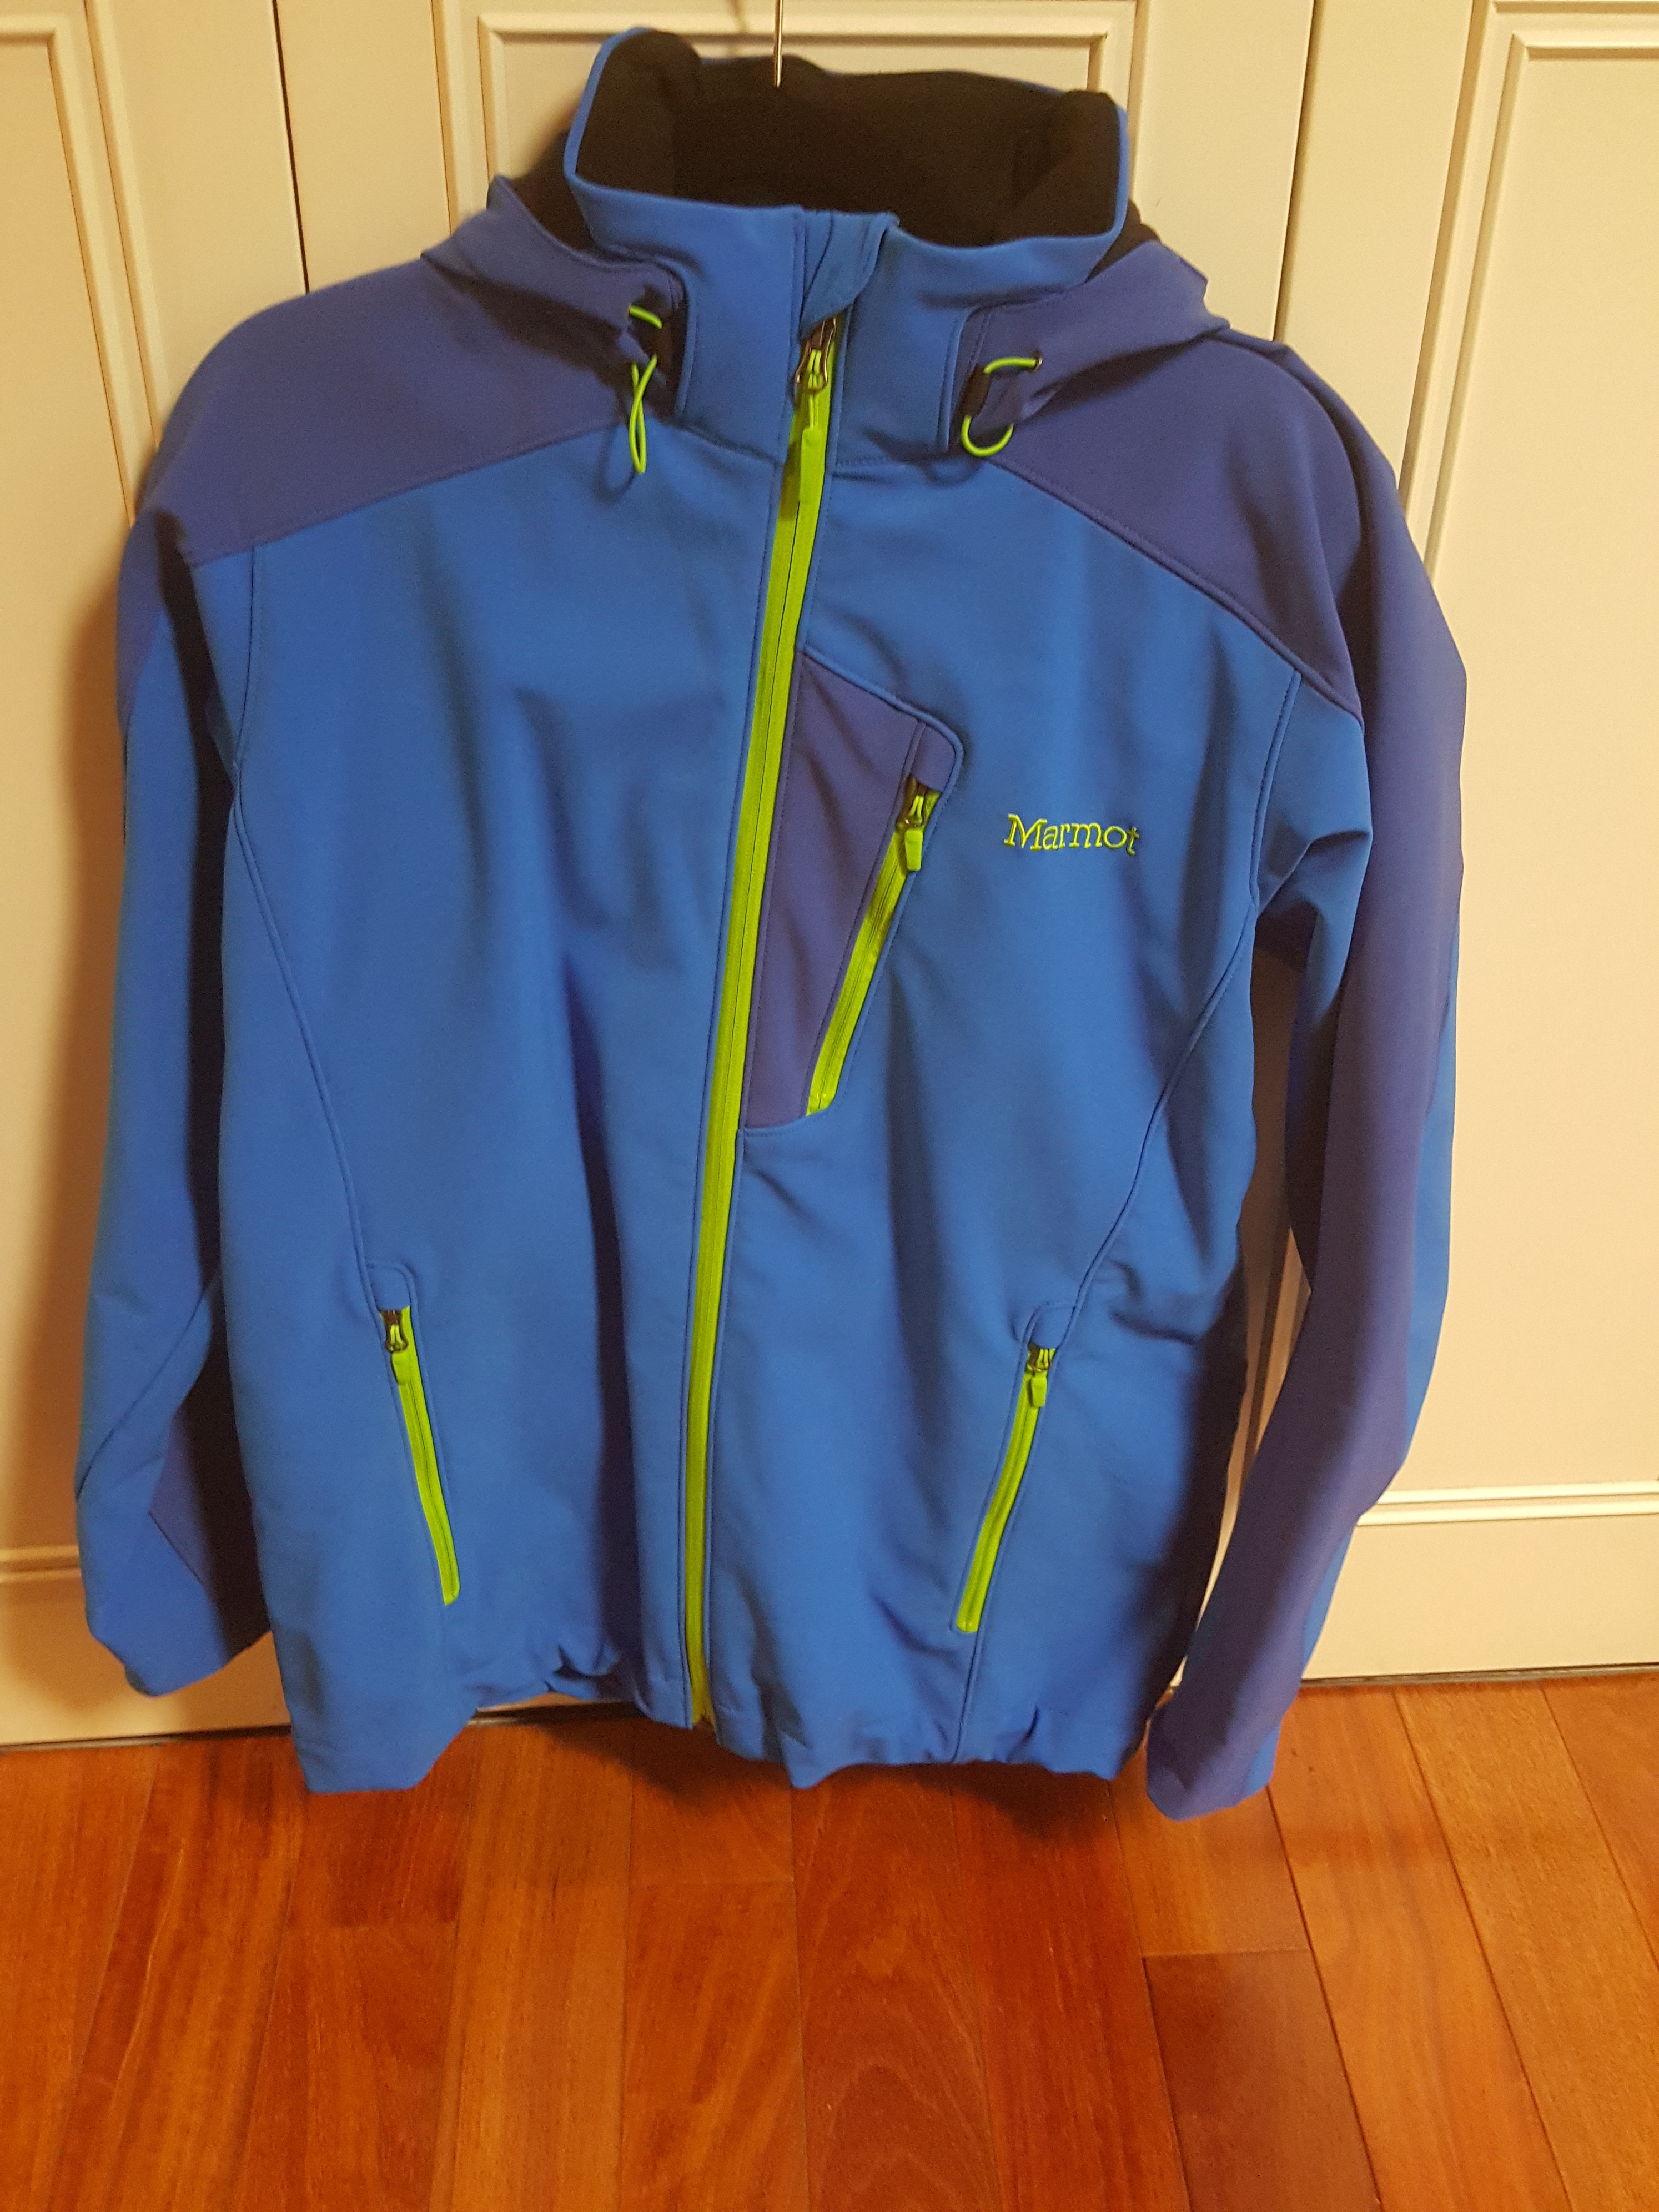 WTS: New marmot jacket - Sell and Trade - Newschoolers.com